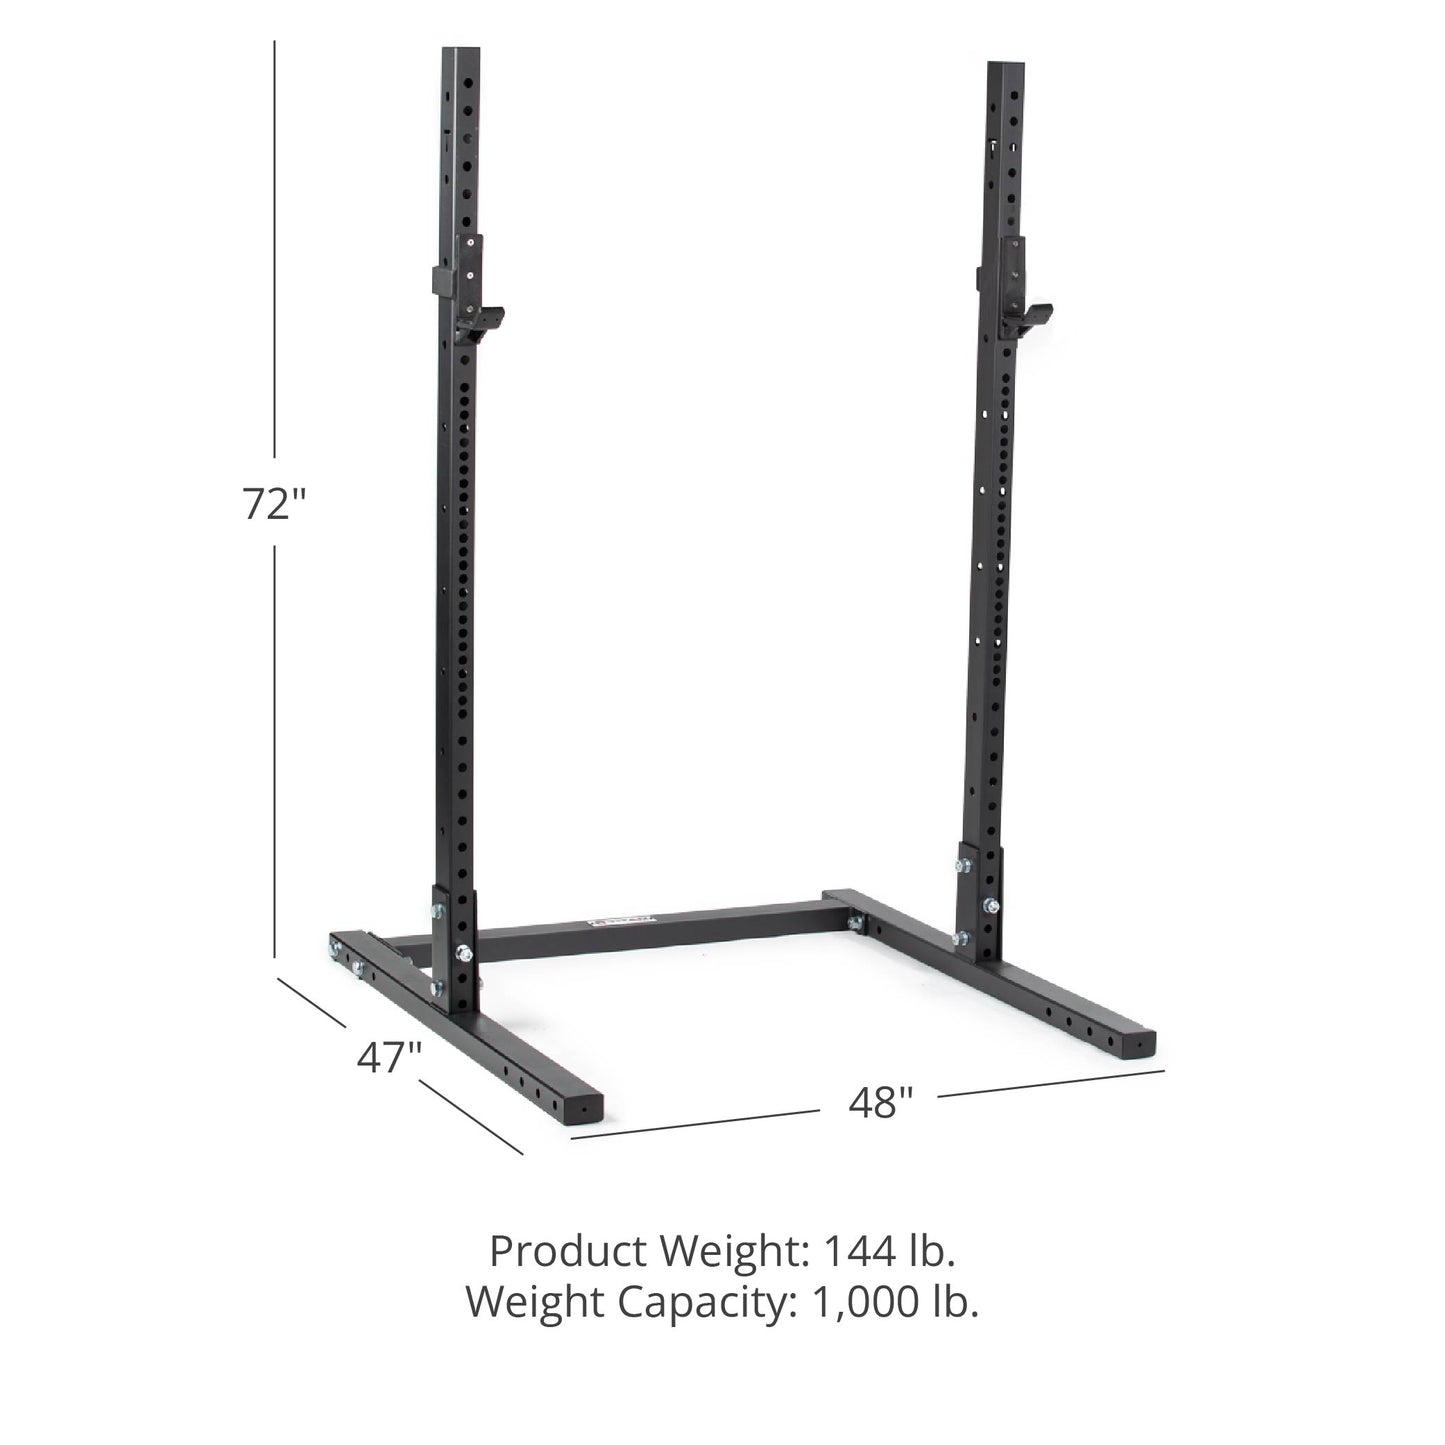 T-3 Series Short Squat Stand - view 10